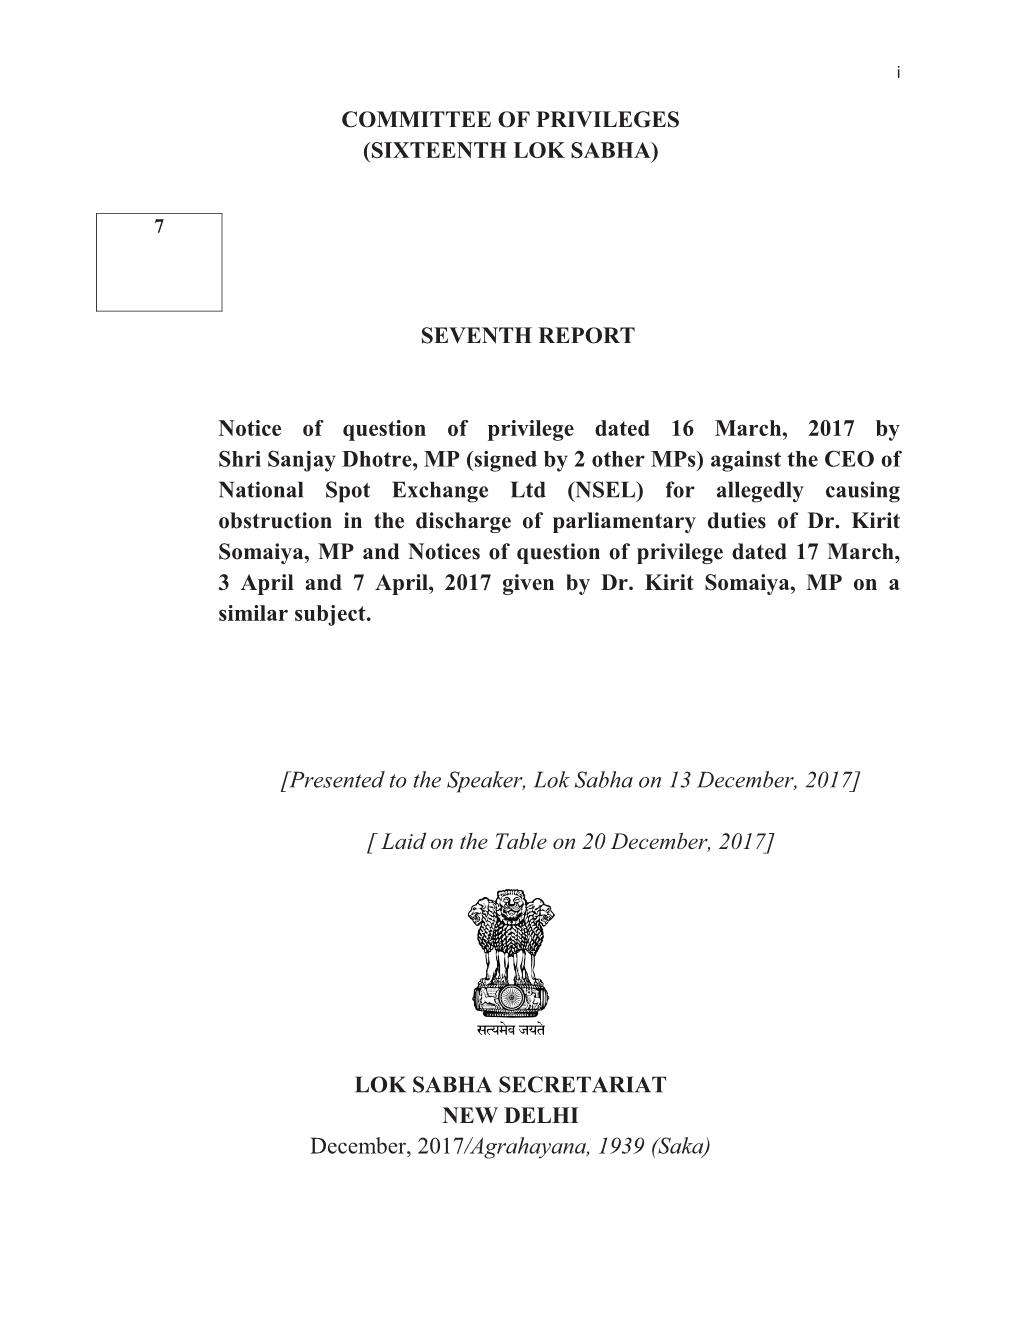 NSEL) for Allegedly Causing Obstruction in the Discharge of Parliamentary Duties of Dr